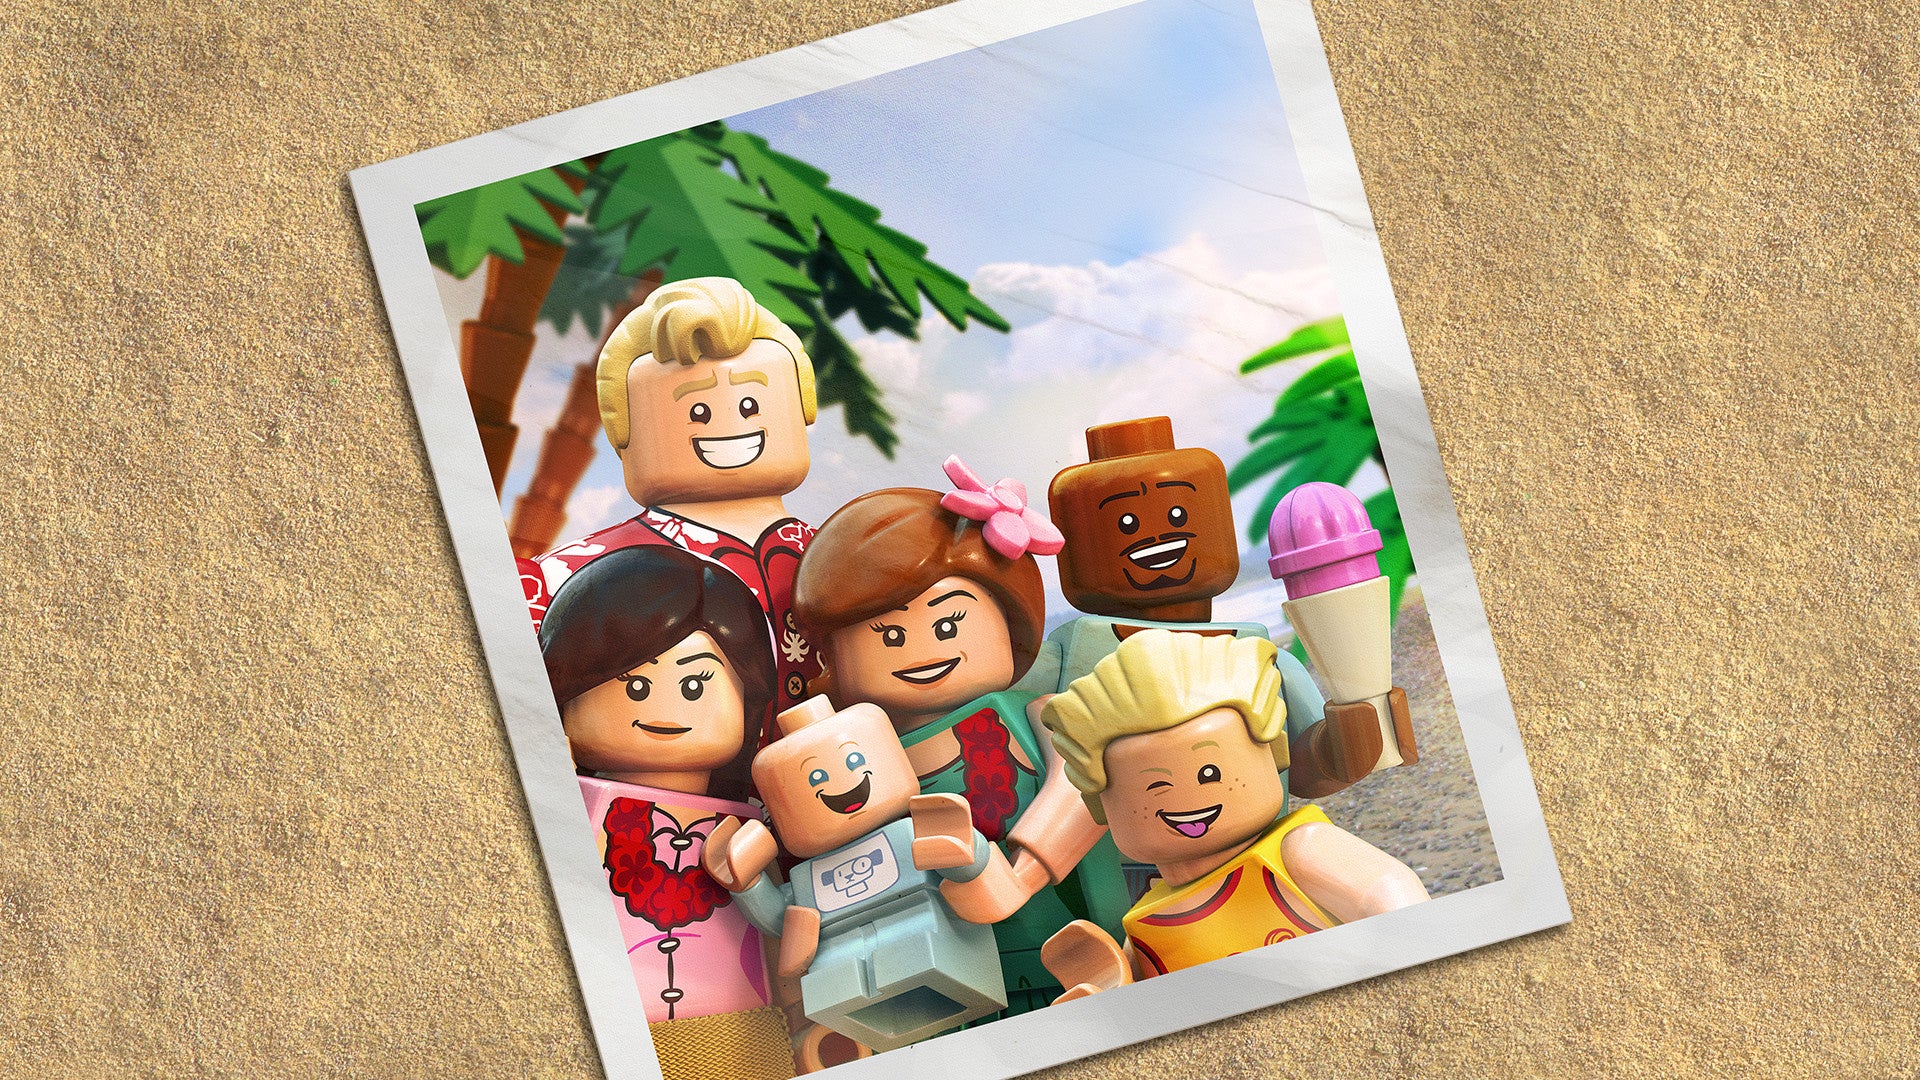 Lego The Incredibles - Parr Family Vacation Character Pack DLC